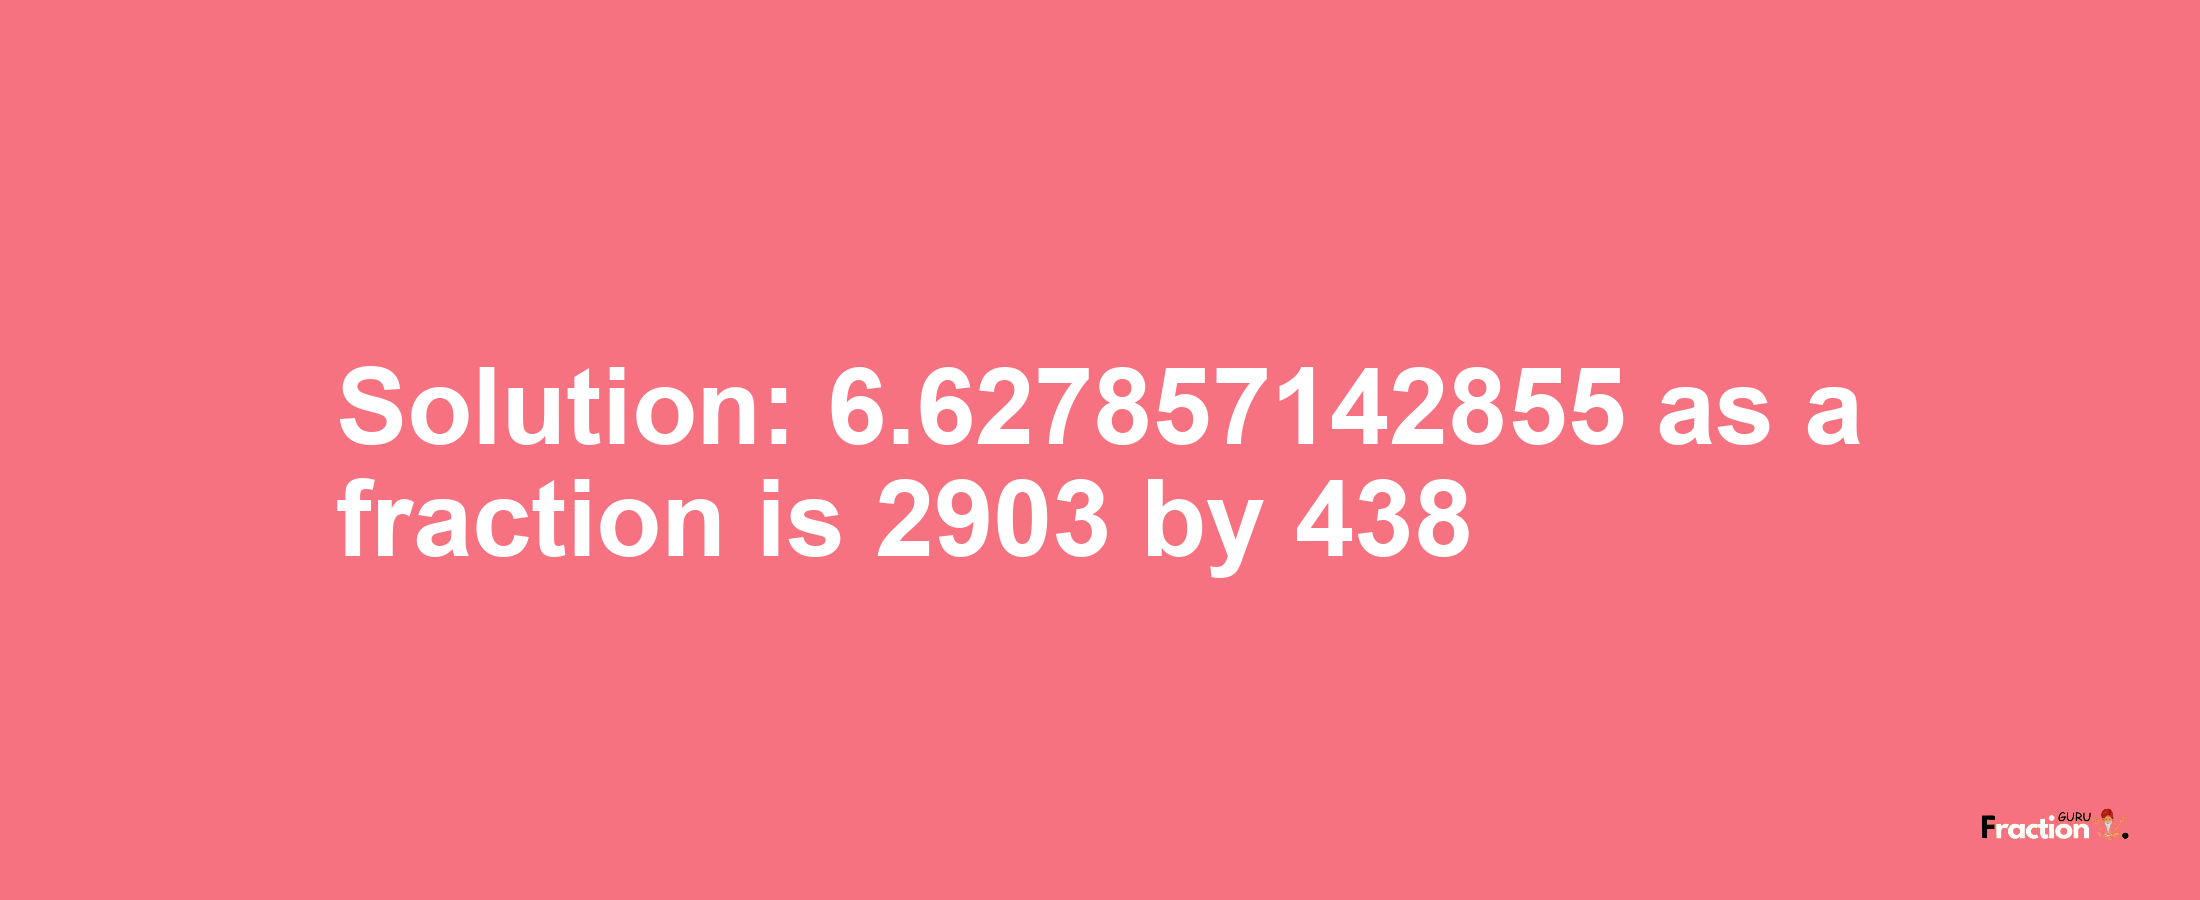 Solution:6.627857142855 as a fraction is 2903/438